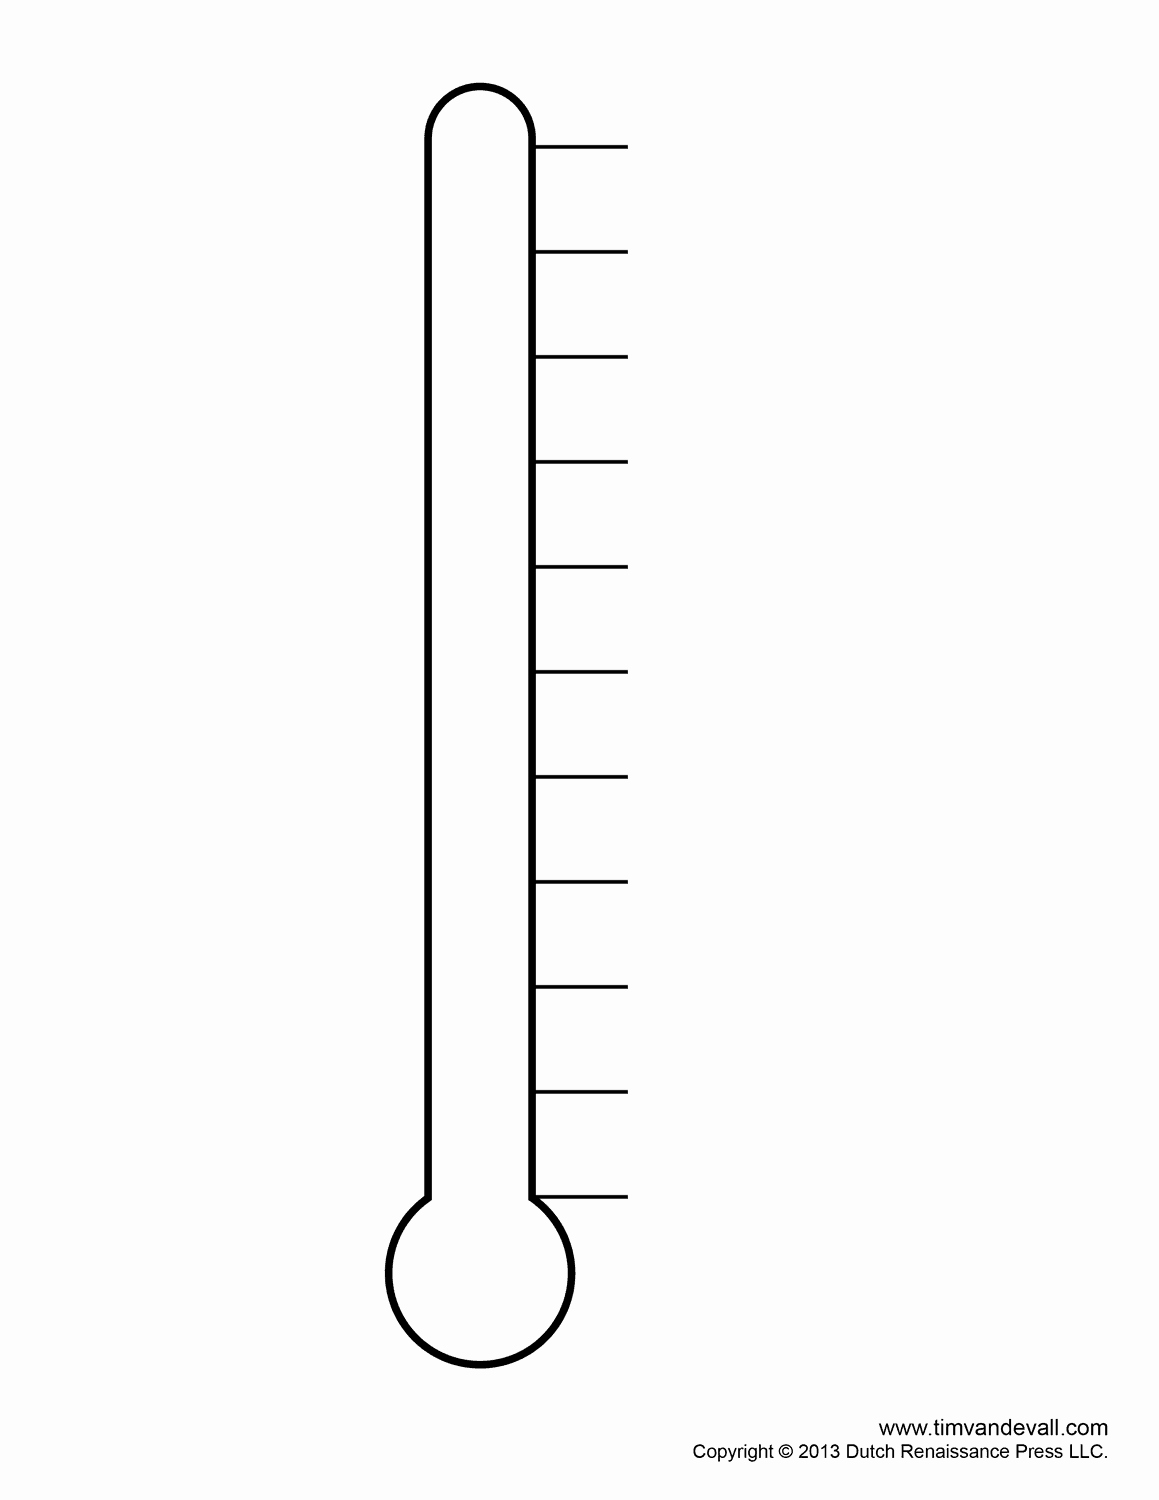 Free Printable thermometer Goal Chart Beautiful Fundraising thermometer Templates for Fundraising events